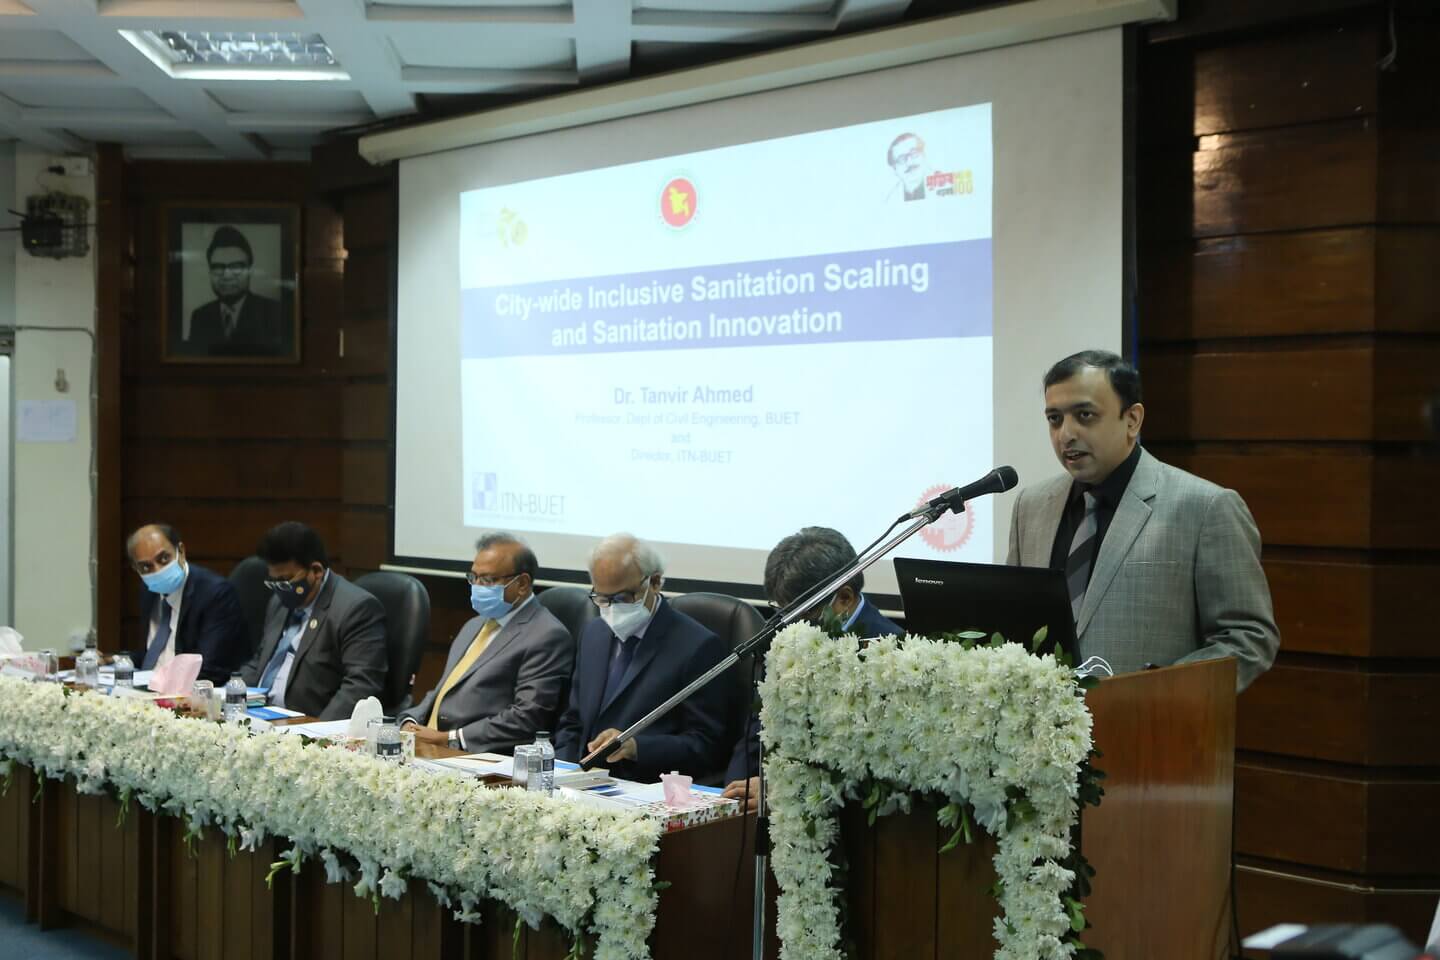 Launching Ceremony of Citywide Inclusive Sanitation Scaling and Sanitation Innovation